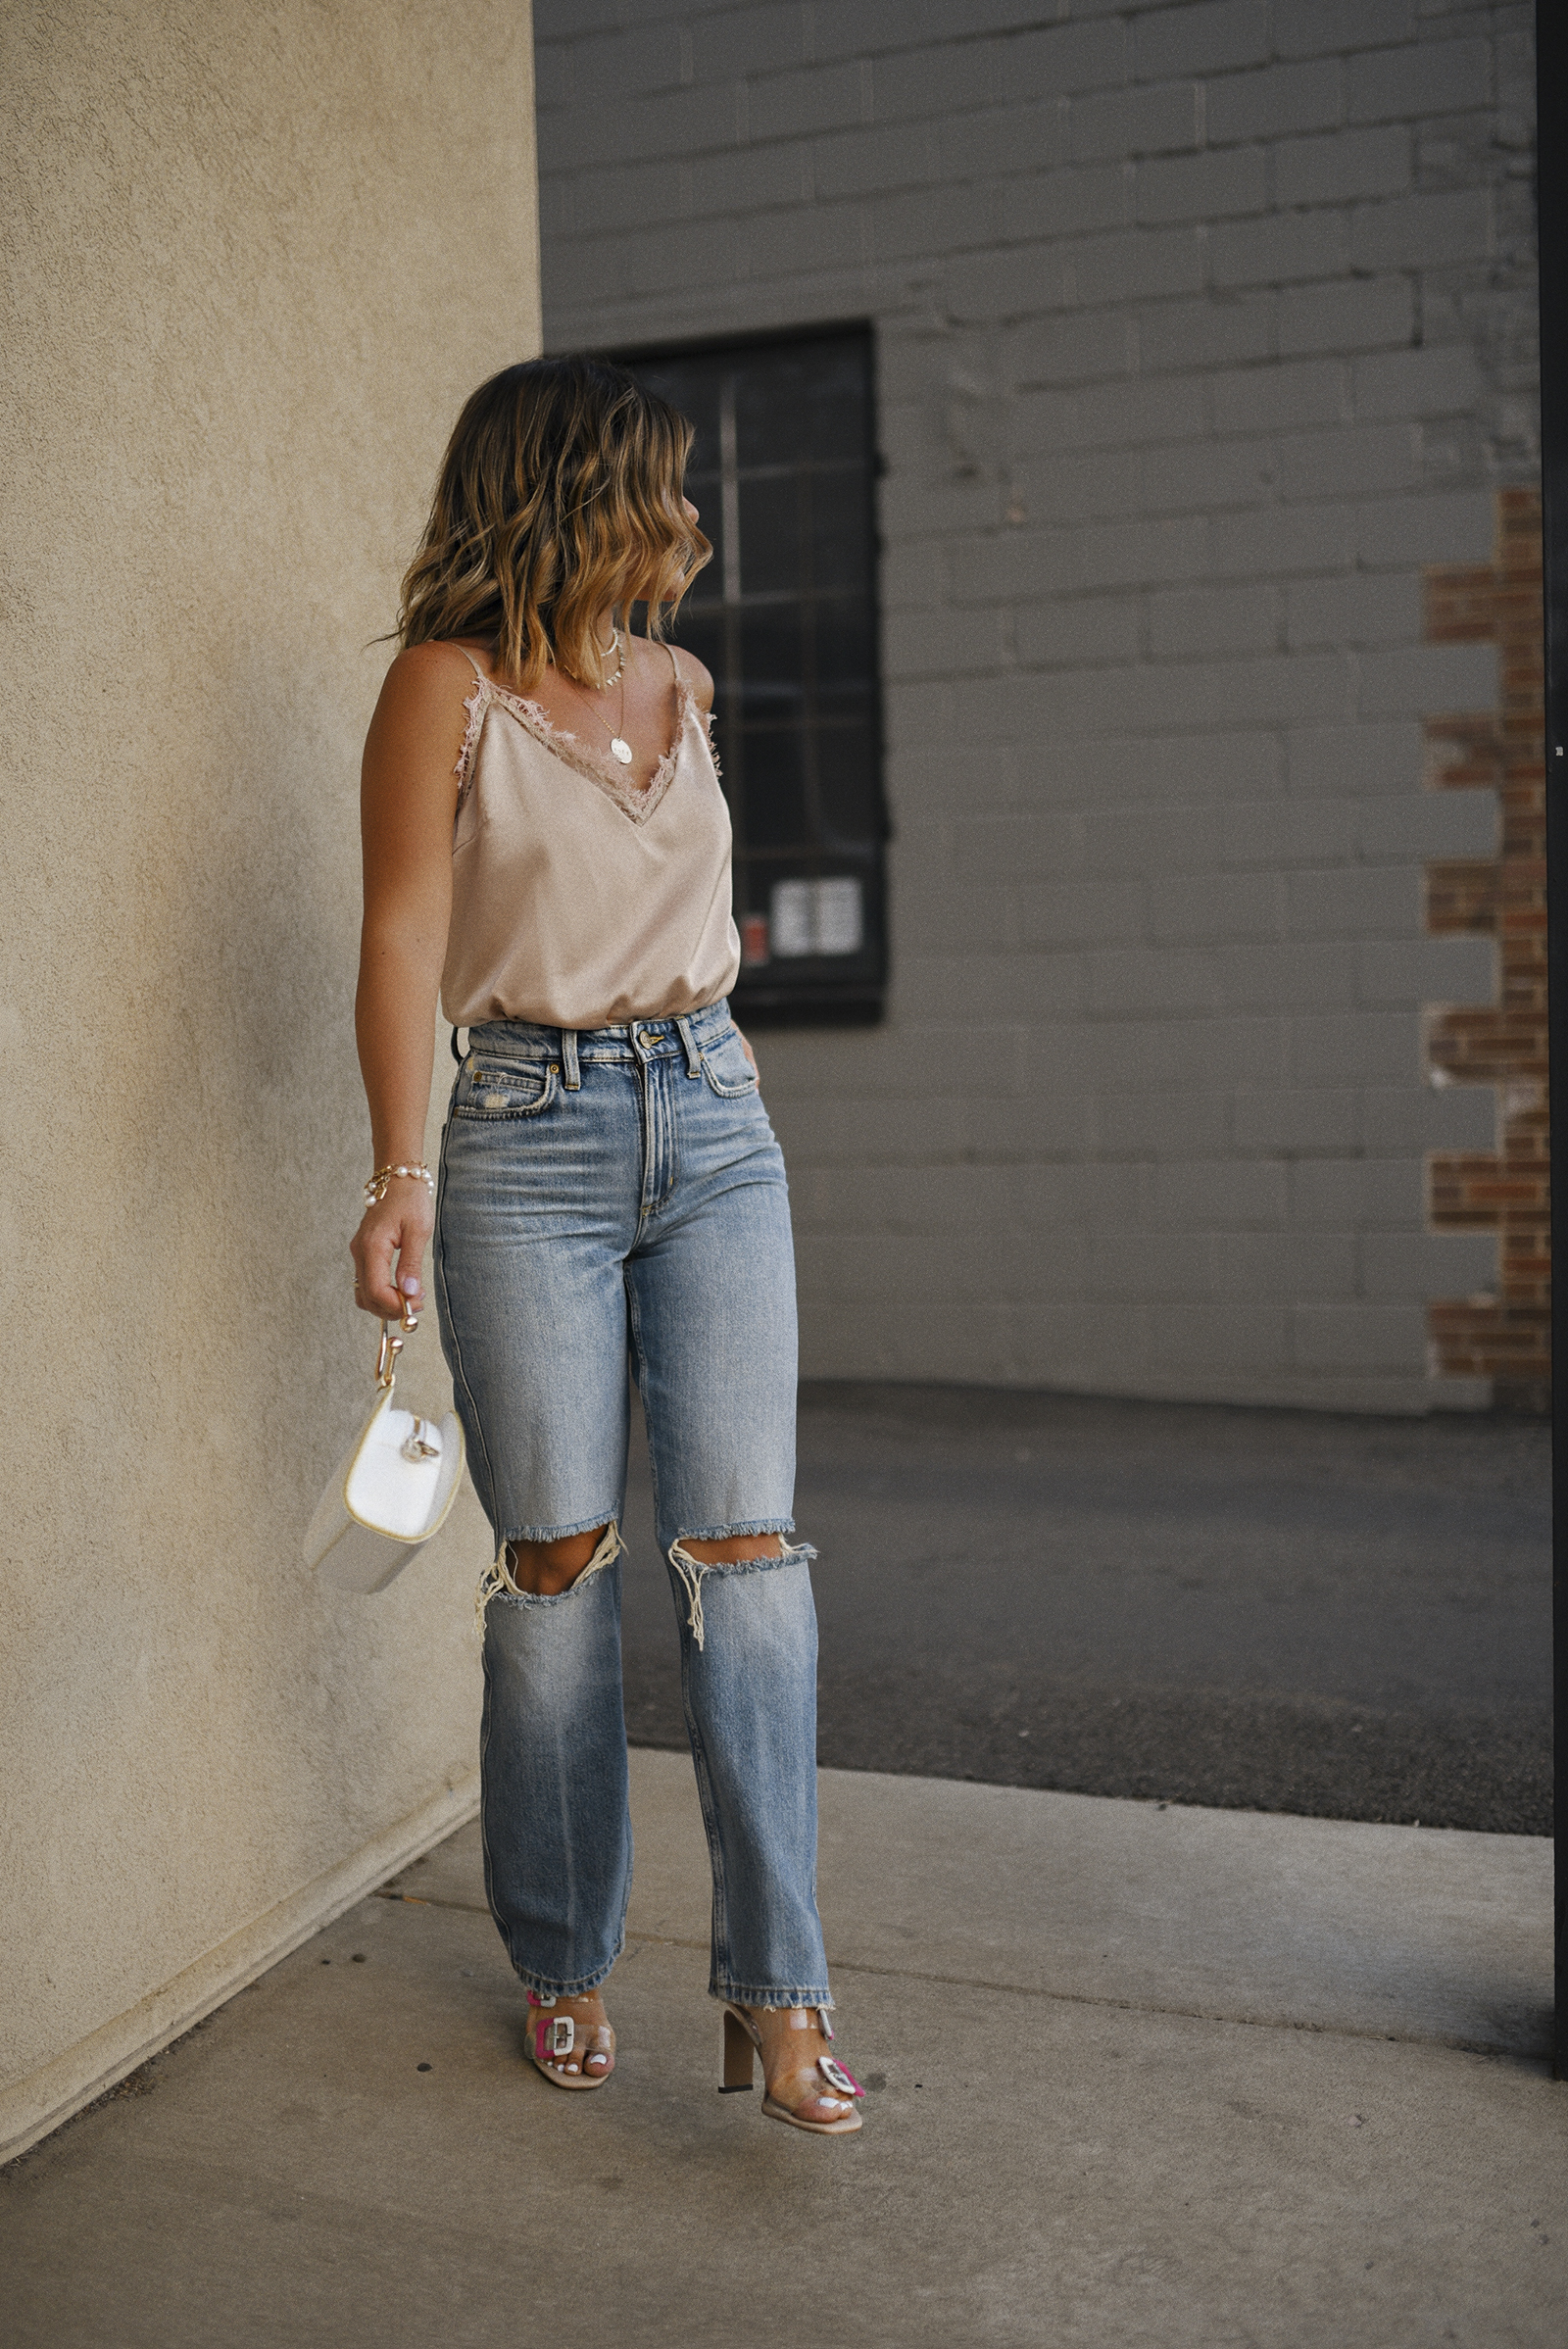 Fashion Over 50-Summer Jeans Styling - Cindy Hattersley Design